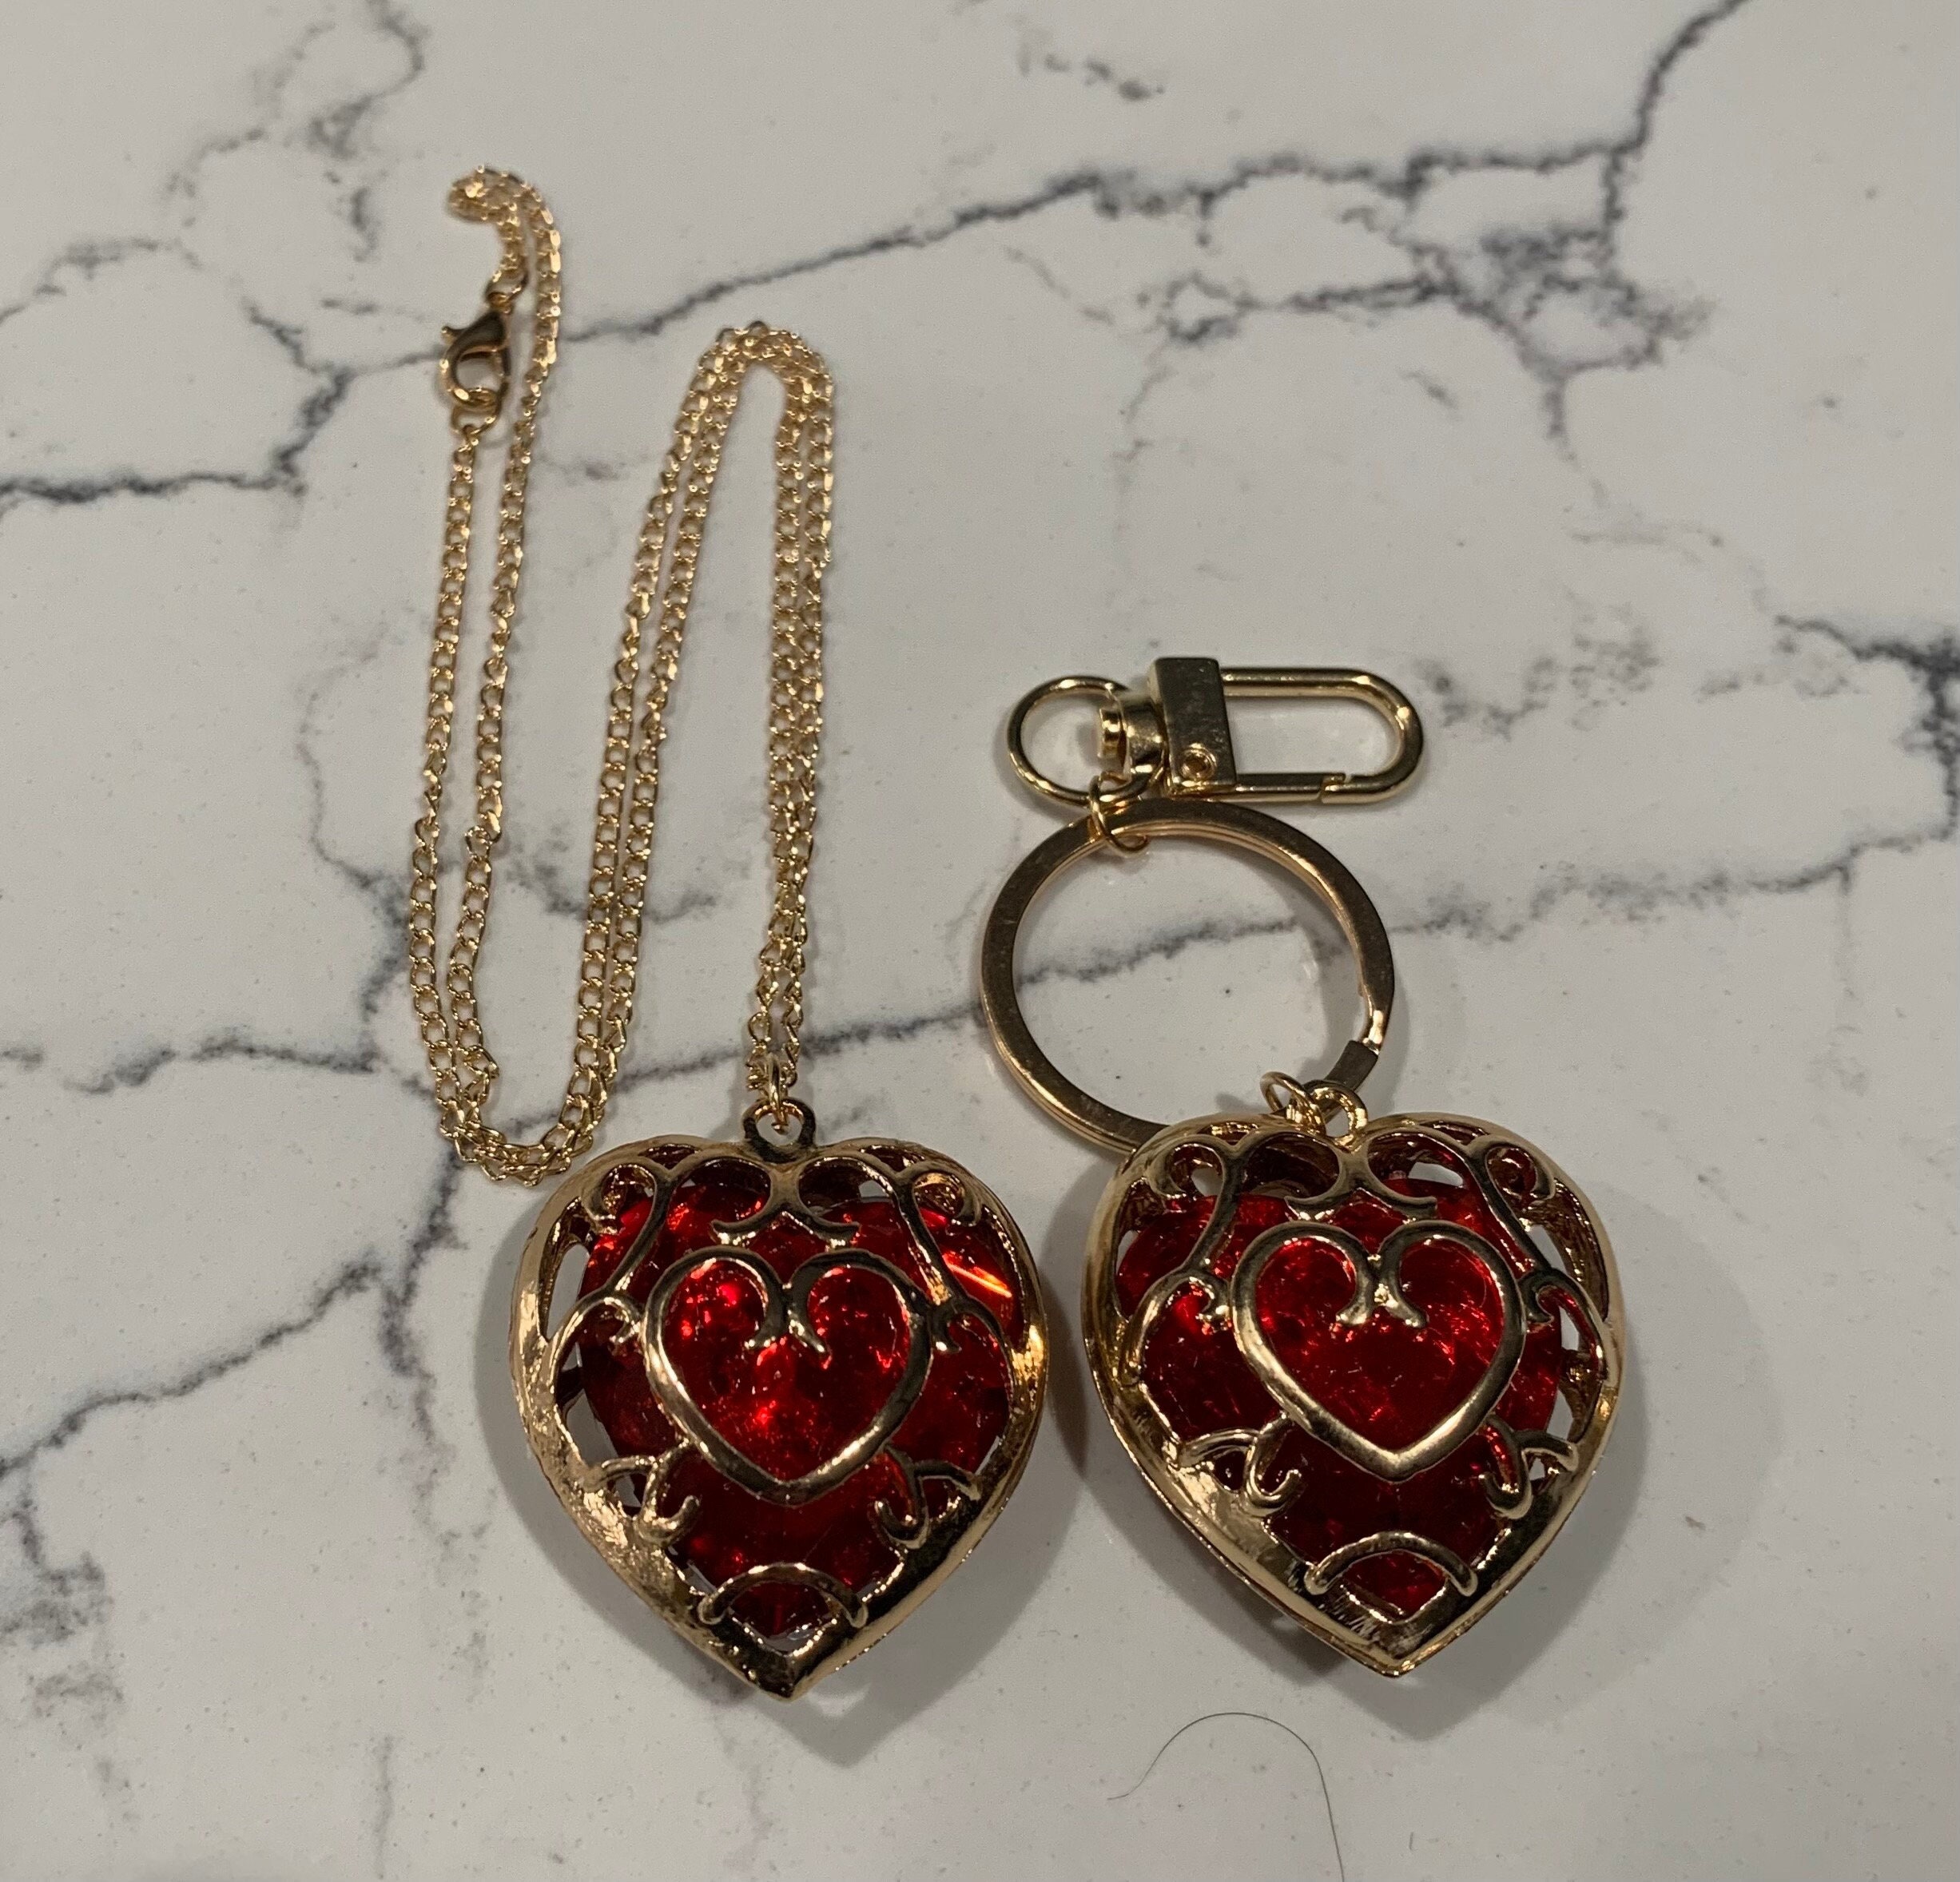 A very Vuitton love token: the new Lockit jewels from Louis